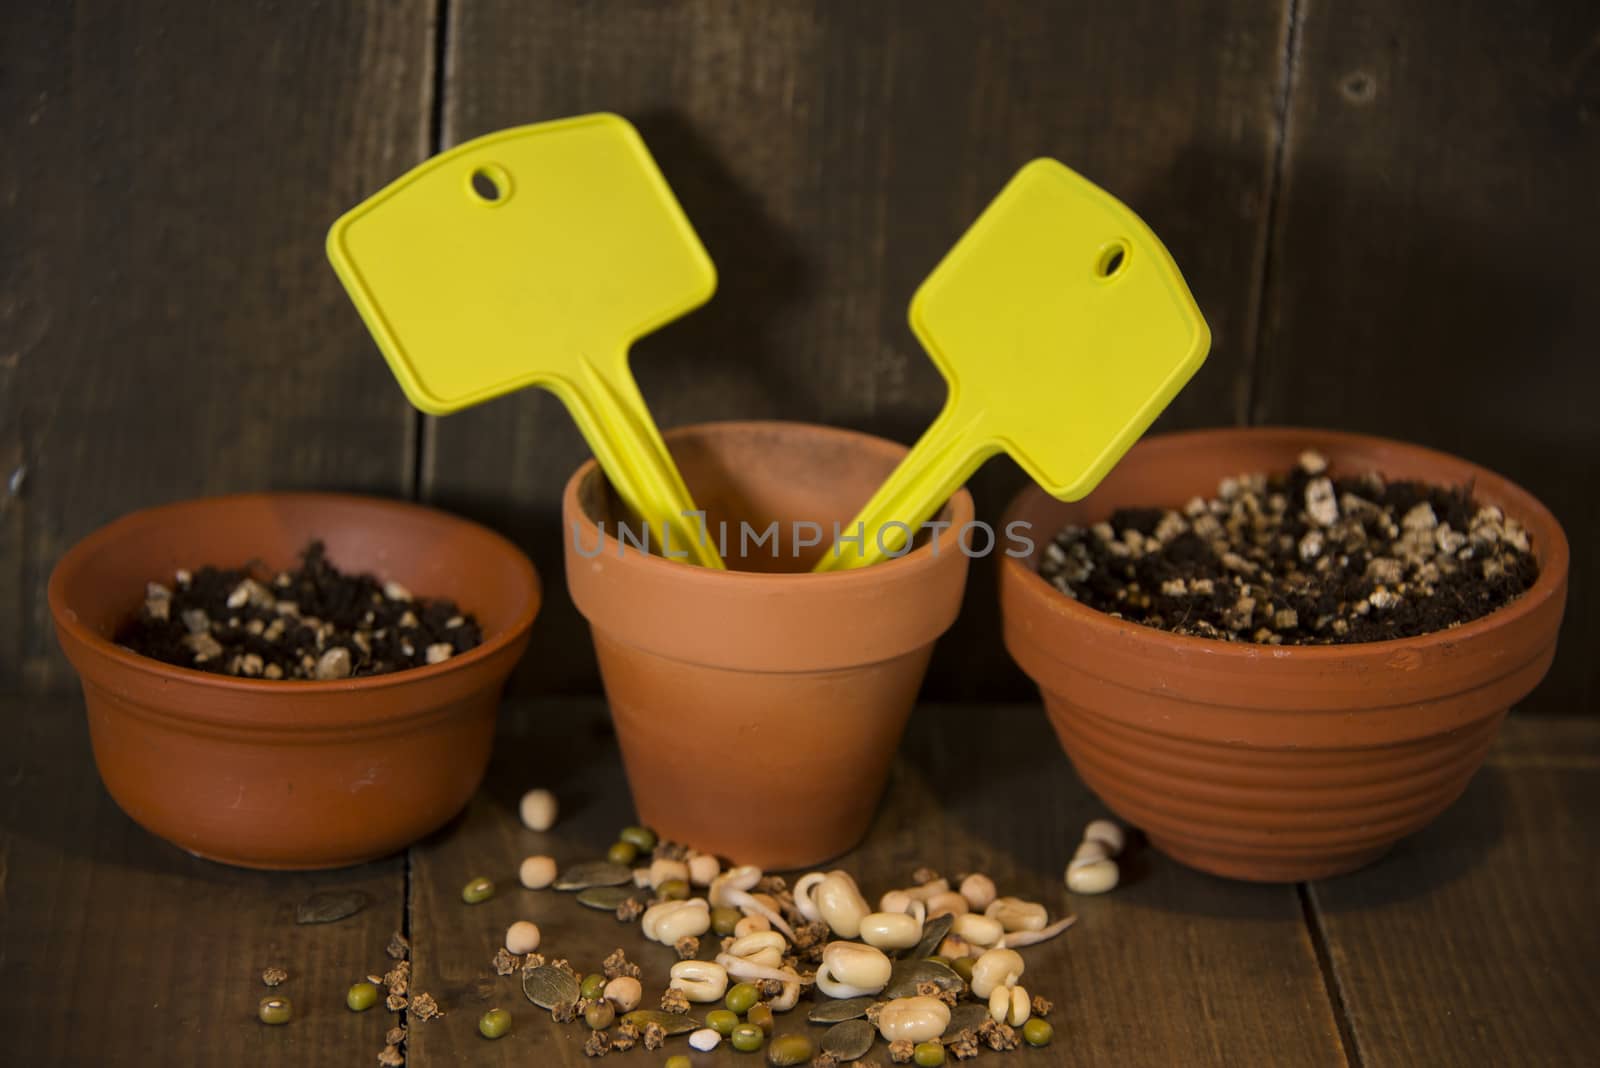 Seeds and terracotta pots by GryT